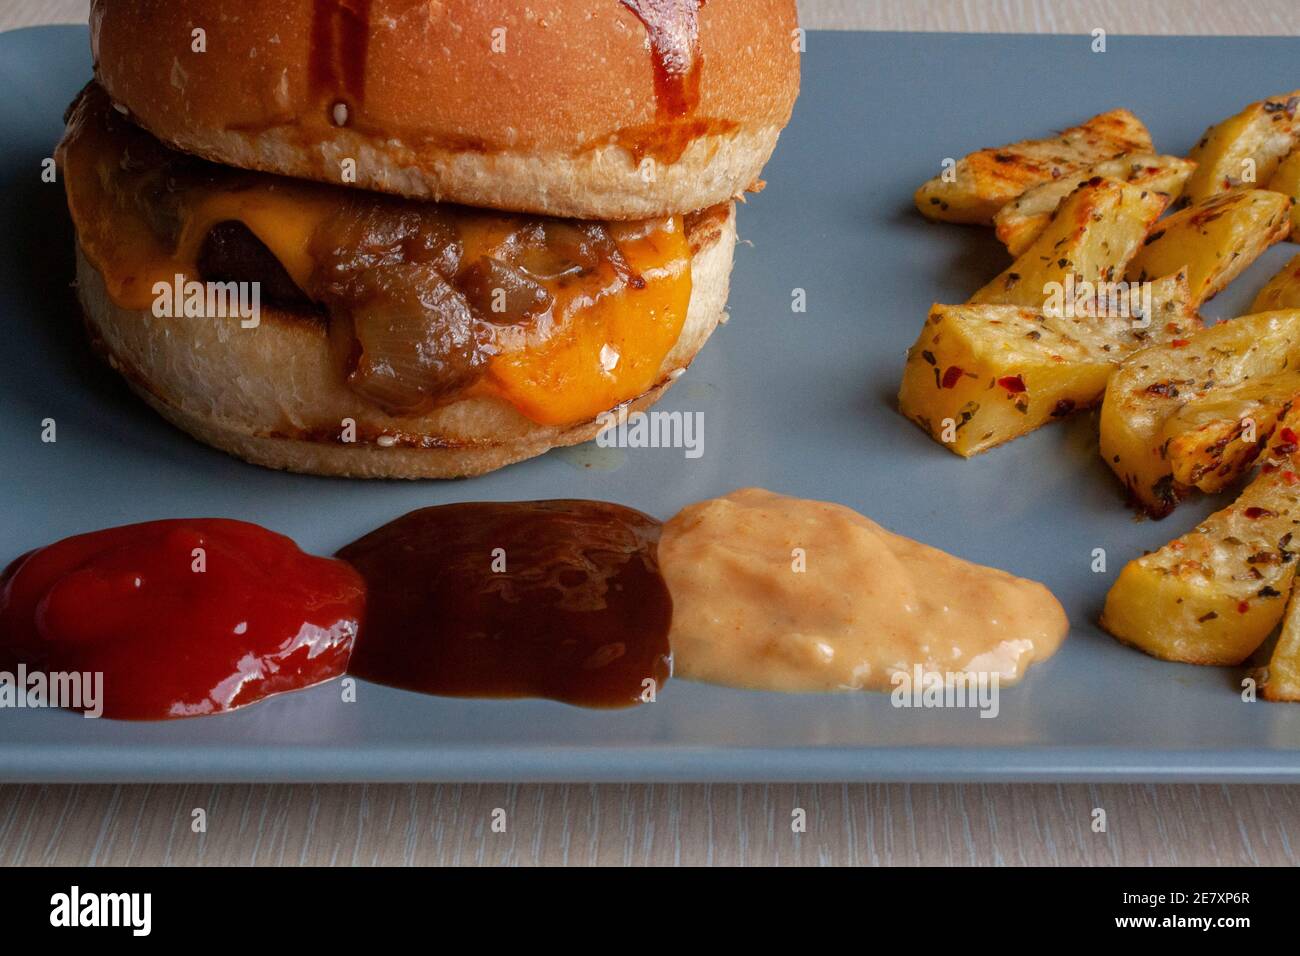 homemade hamburger with baked potatoes, grilled beef. some areas are out of focus. selective focuse on hamburger Stock Photo